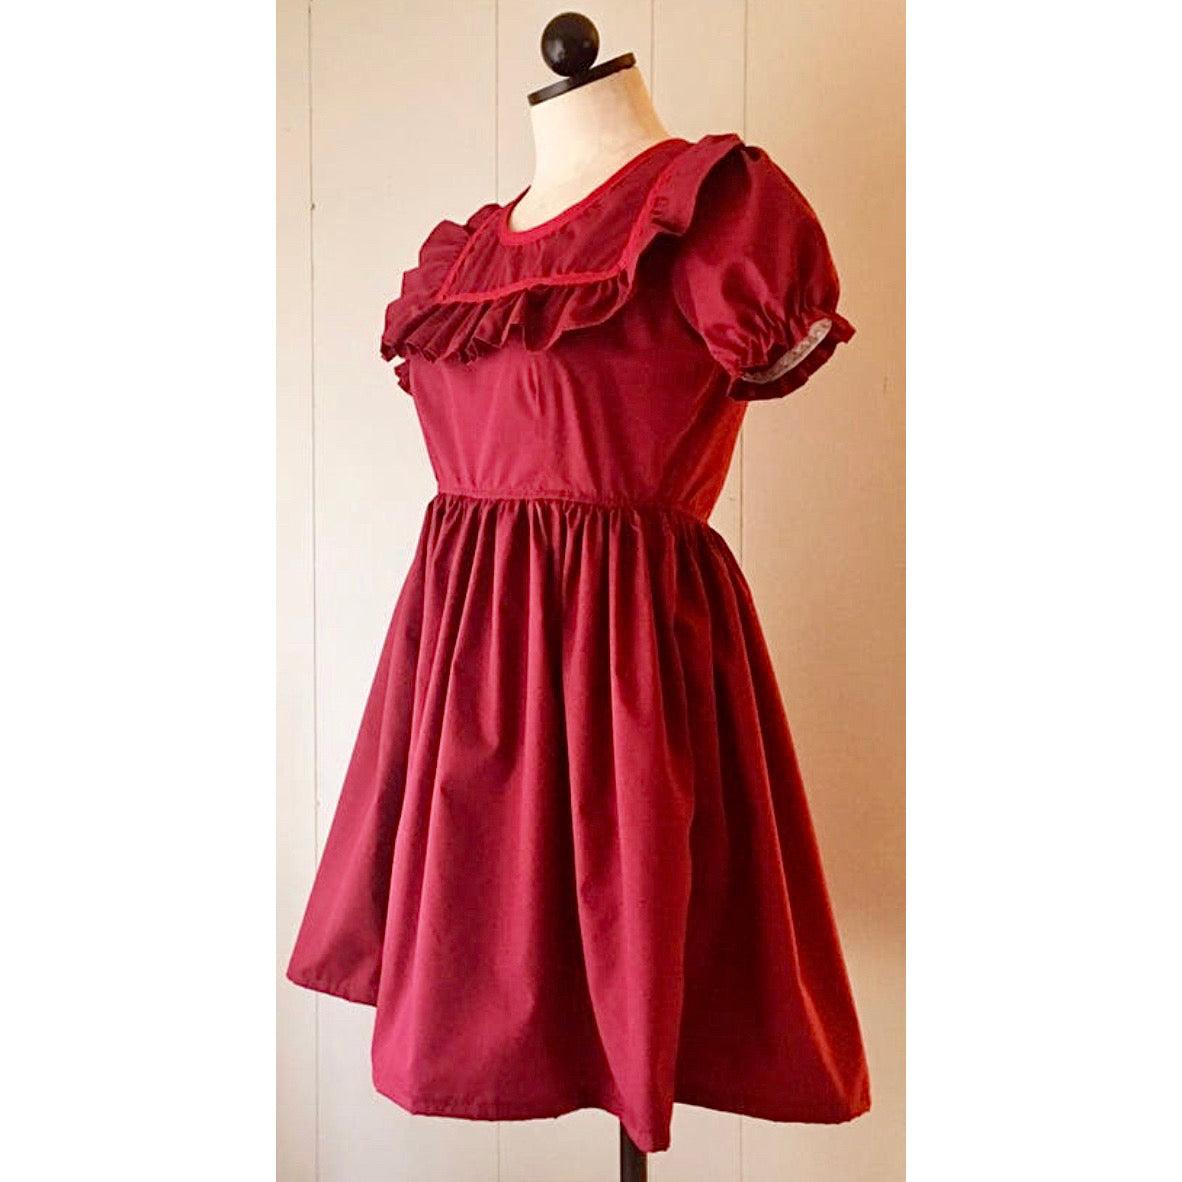 The Short Sleeve Savannah Dress in Berry Red